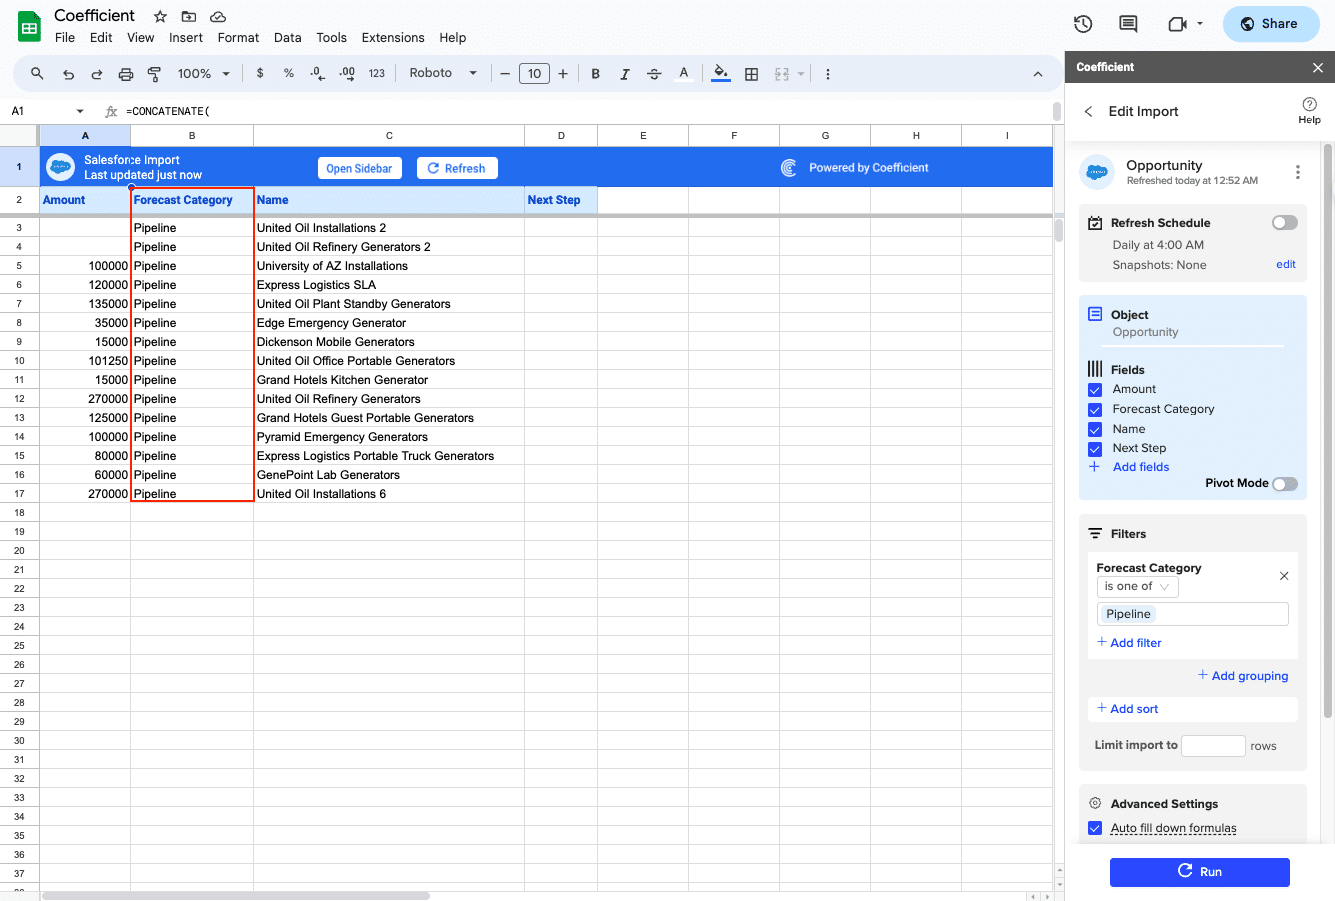  Importing a data set into a Google Sheets spreadsheet linked to a pie chart.